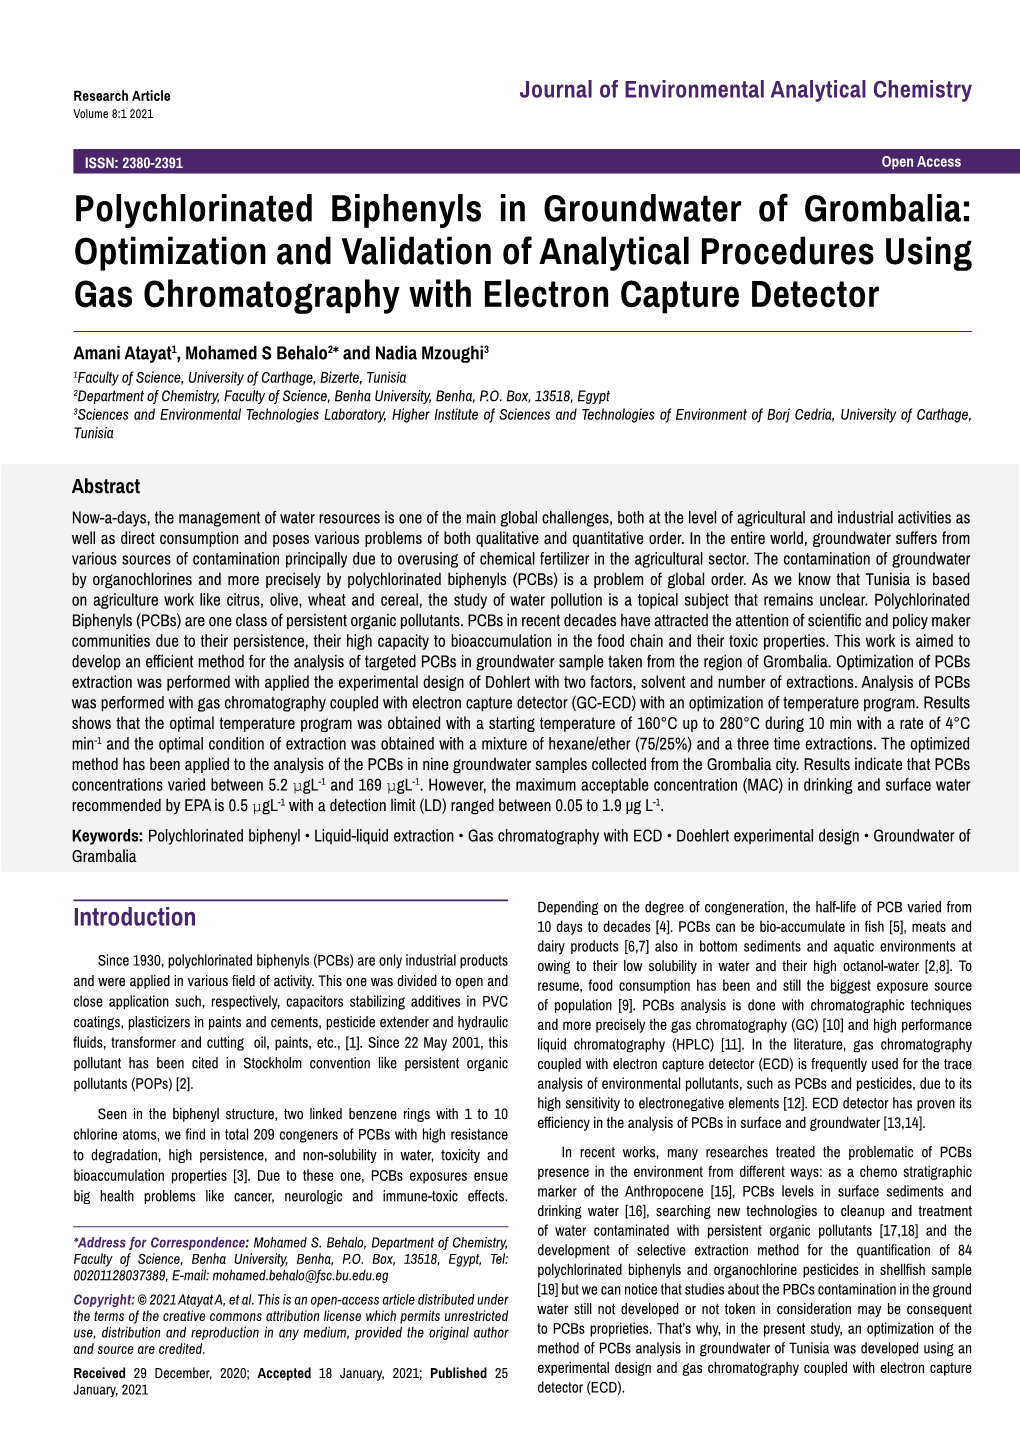 Polychlorinated Biphenyls in Groundwater of Grombalia: Optimization and Validation of Analytical Procedures Using Gas Chromatography with Electron Capture Detector